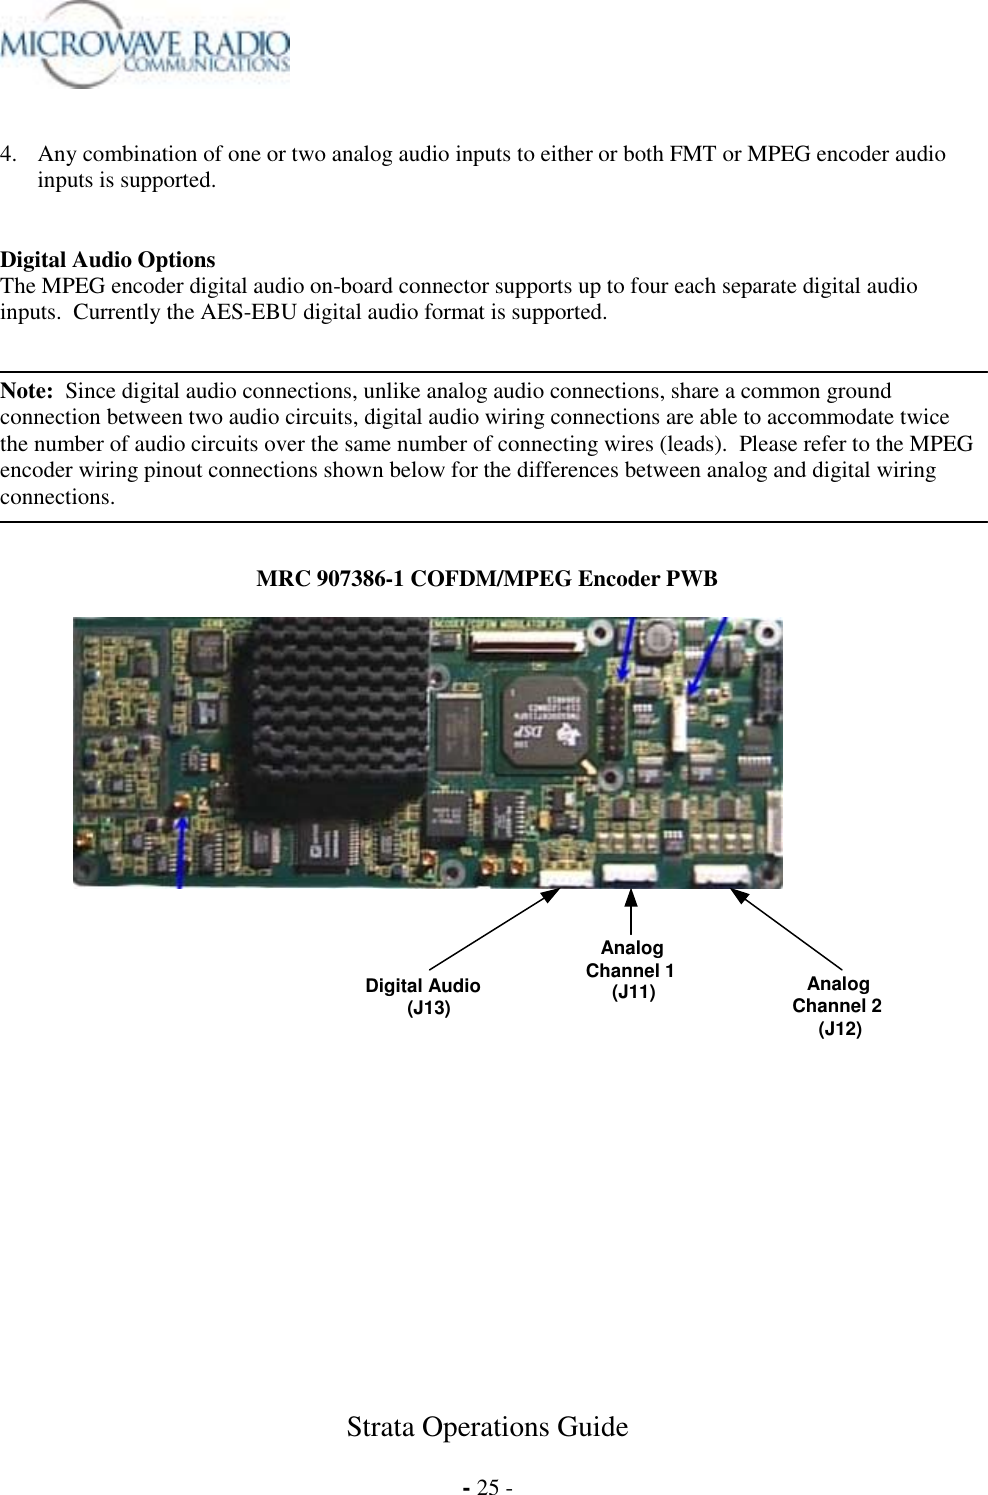  Strata Operations Guide  - 25 -   4.  Any combination of one or two analog audio inputs to either or both FMT or MPEG encoder audio inputs is supported.   Digital Audio Options The MPEG encoder digital audio on-board connector supports up to four each separate digital audio inputs.  Currently the AES-EBU digital audio format is supported.   Note:  Since digital audio connections, unlike analog audio connections, share a common ground connection between two audio circuits, digital audio wiring connections are able to accommodate twice the number of audio circuits over the same number of connecting wires (leads).  Please refer to the MPEG encoder wiring pinout connections shown below for the differences between analog and digital wiring connections.   MRC 907386-1 COFDM/MPEG Encoder PWB   Digital Audio         (J13) Analog Channel 1      (J11)  Analog Channel 2     (J12)  